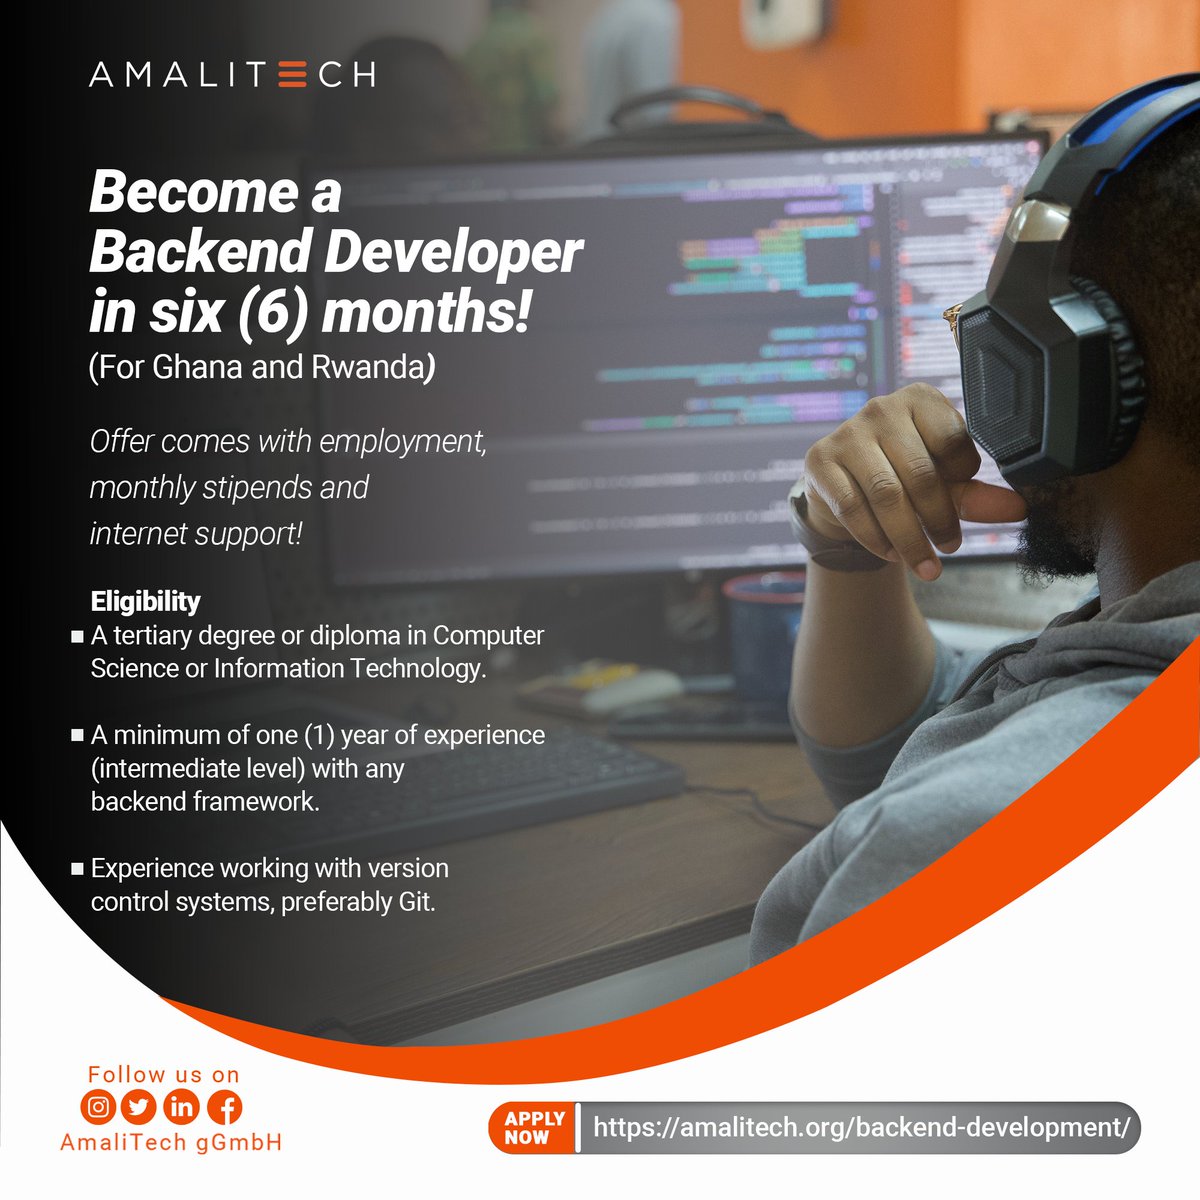 We've extended applications for our Frontend(amalitech.org/frontend-devel…) and Backend(amalitech.org/backend-develo…) specializations of our Graduate Trainee Programme in Ghana, Kumasi and Rwanda, Kigali. The 6-month free training offers a direct employment path, monthly stipend, &…